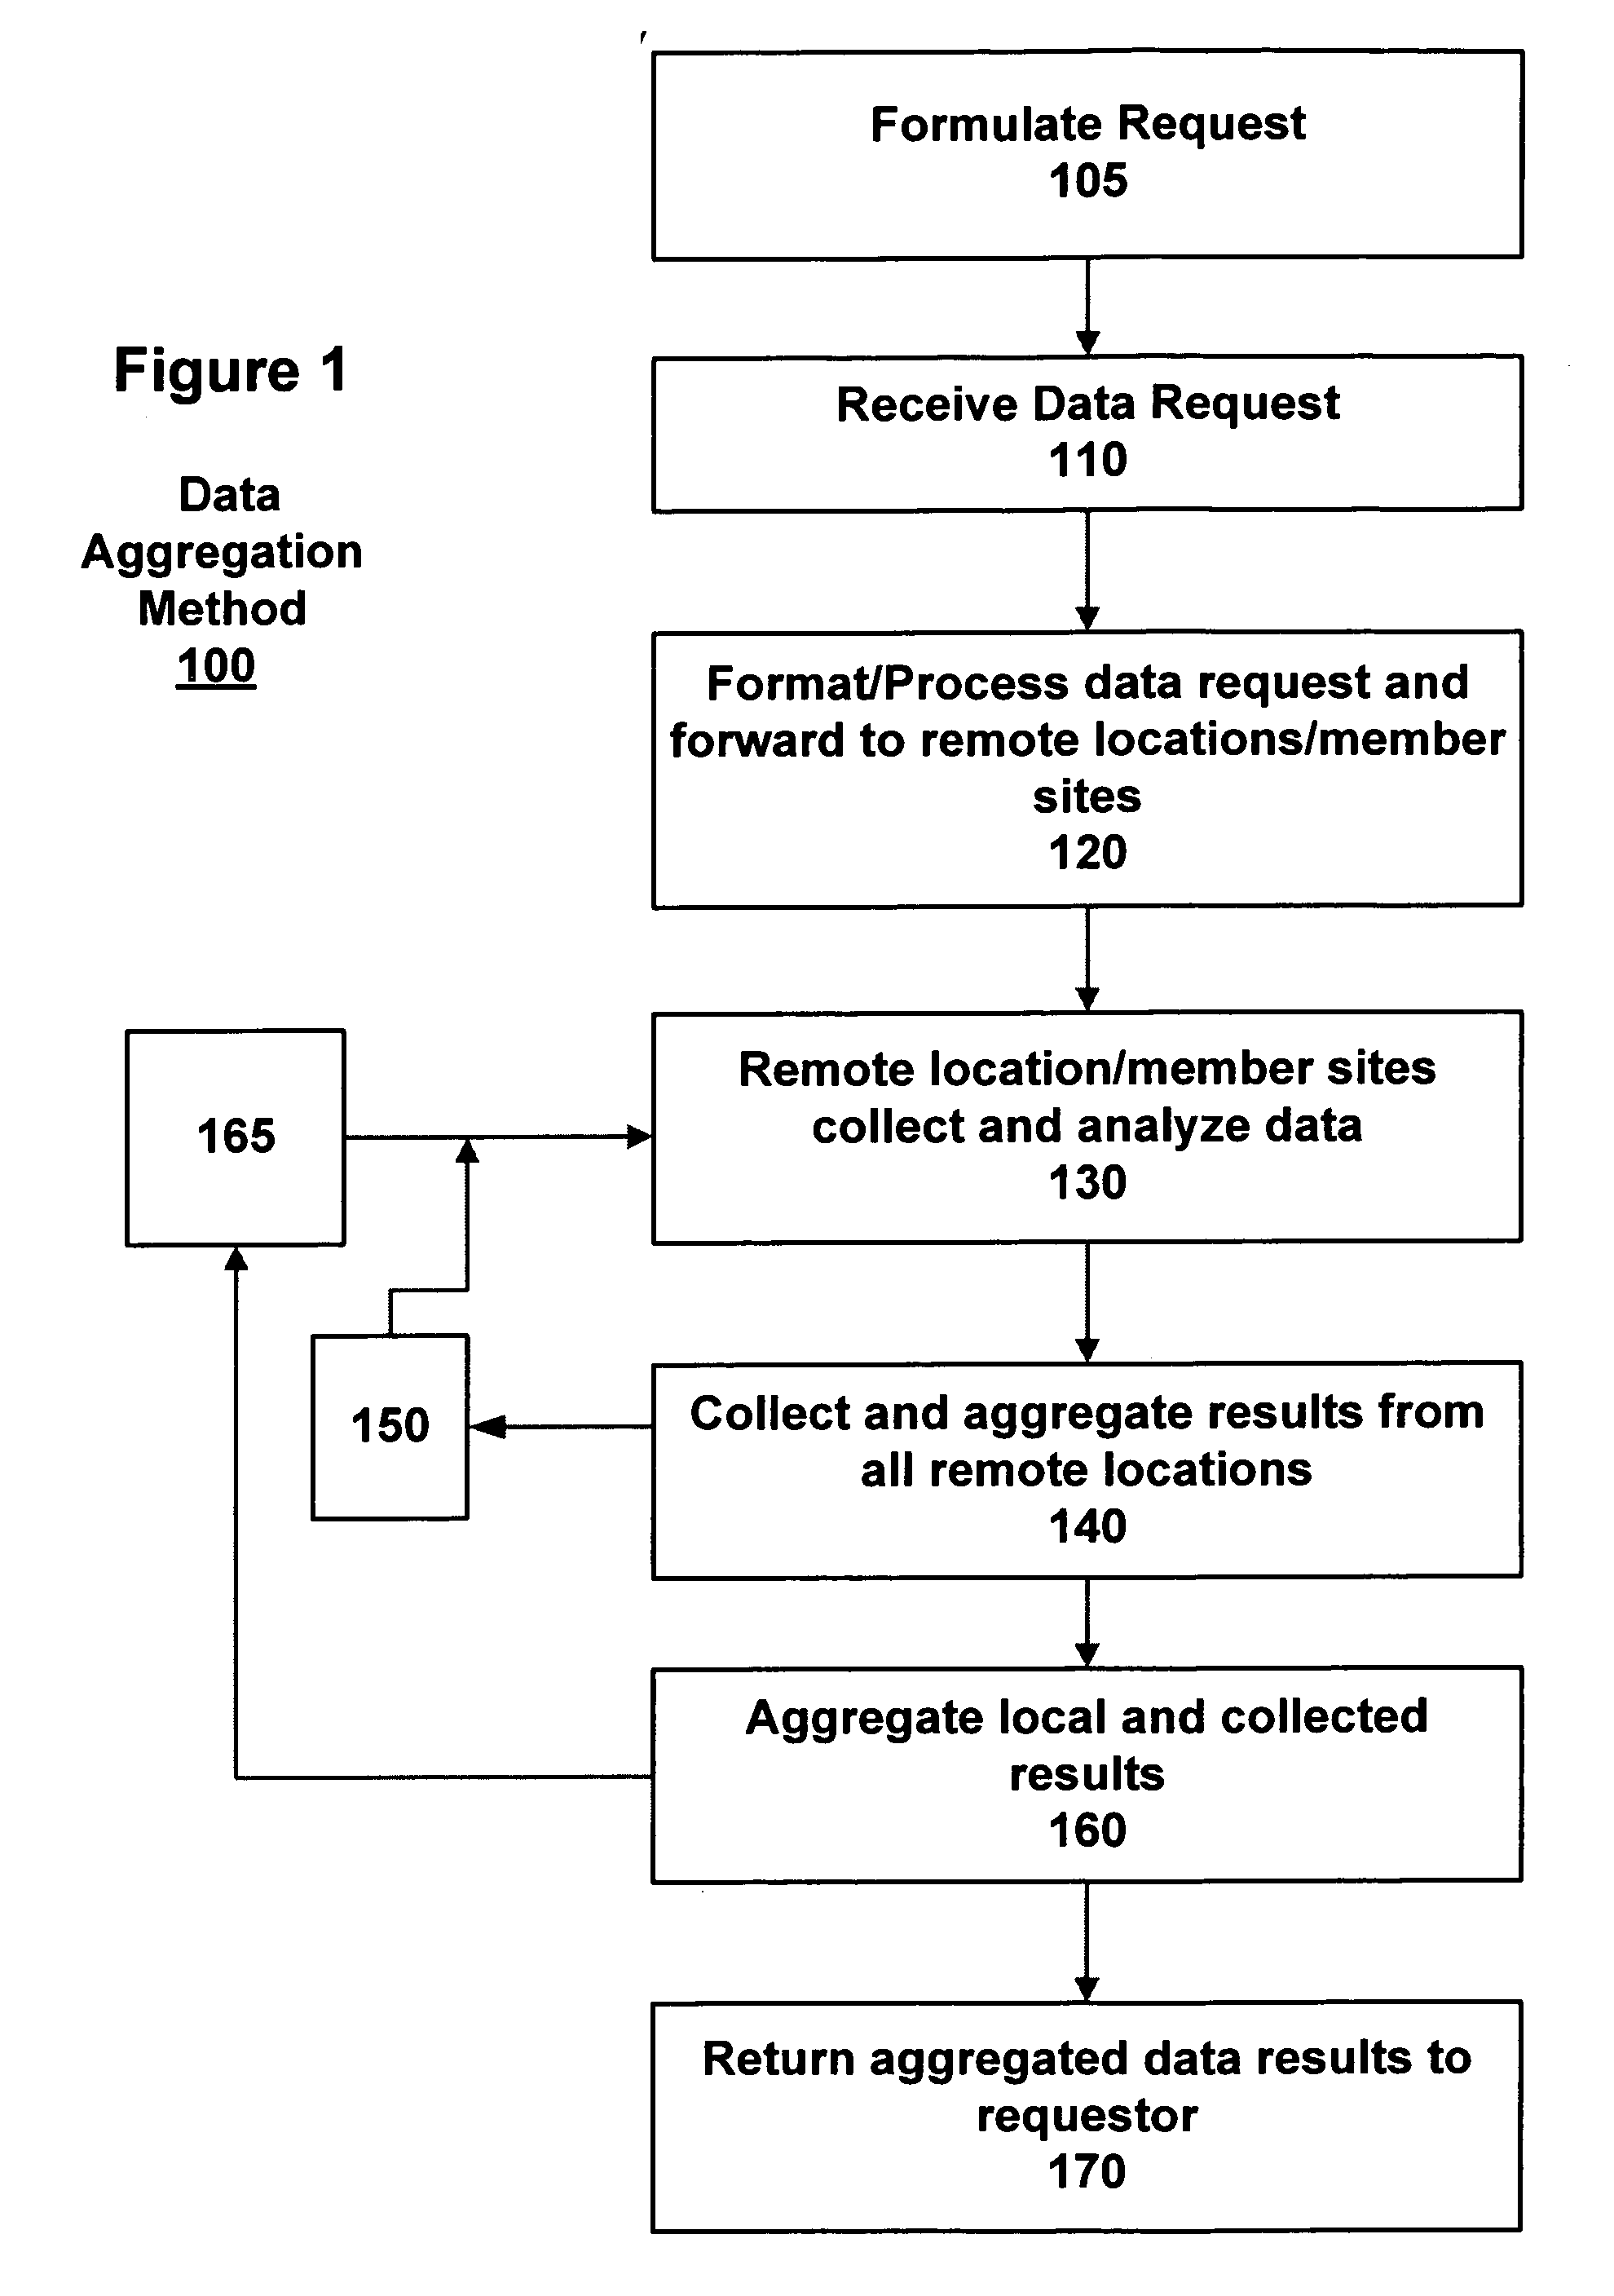 System and method for aggregation and analysis of information from multiple disparate sources while assuring source and record anonymity using an exchange hub